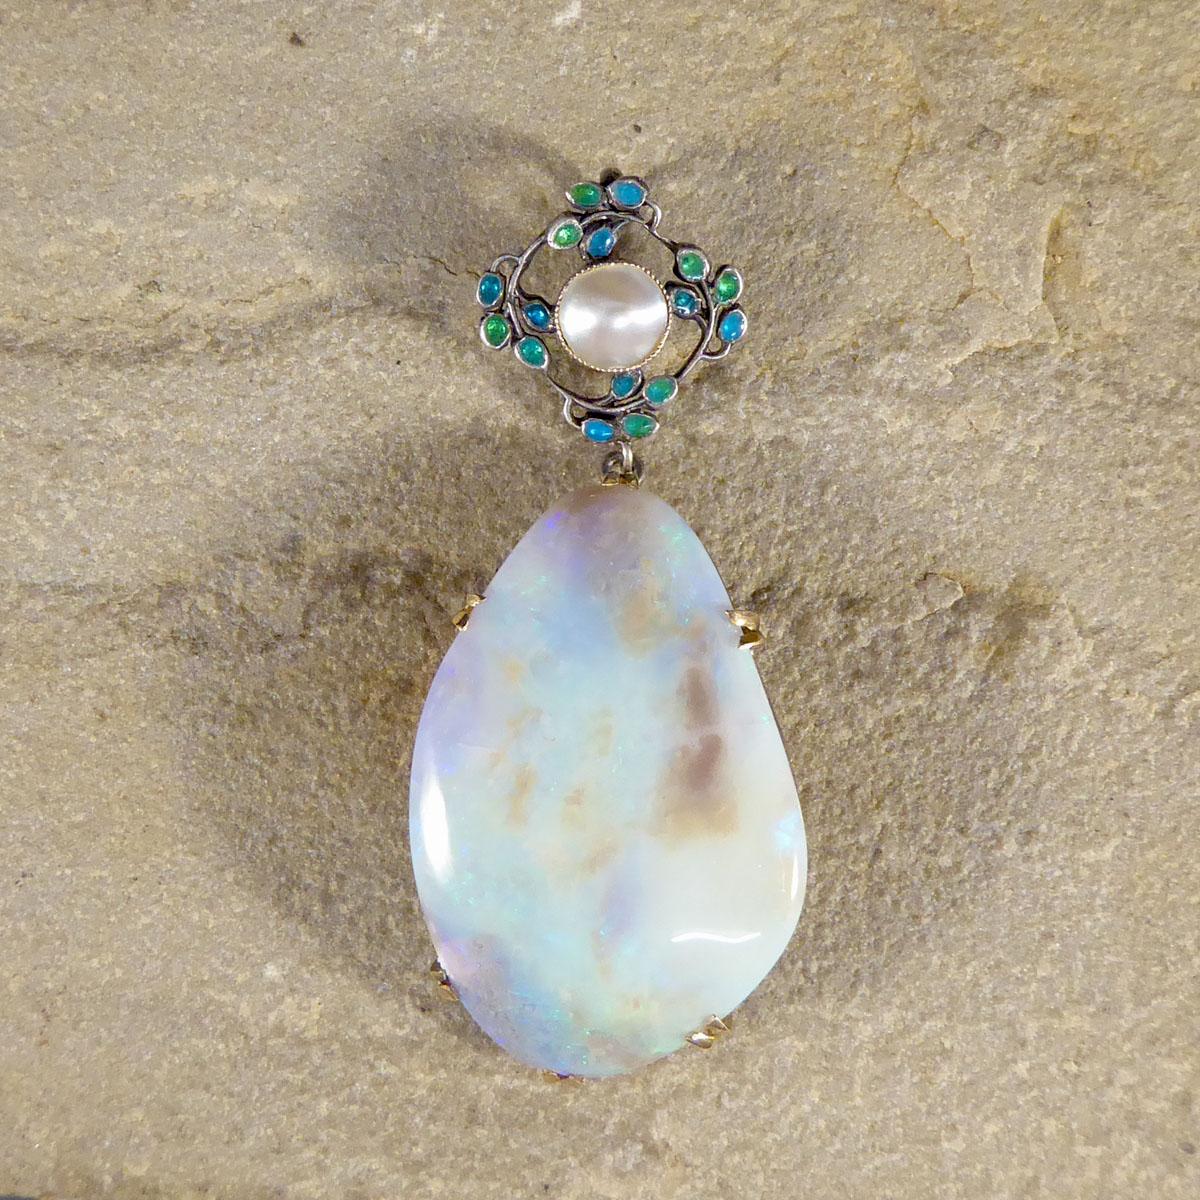 A lovely Arts and Crafts hand crafted pendant with made with Yellow Gold and Silver setting. This gorgeous quality pendant holds a large Opal in a double claw setting, the setting has been made to shape around the unusual shaped Opal holding is